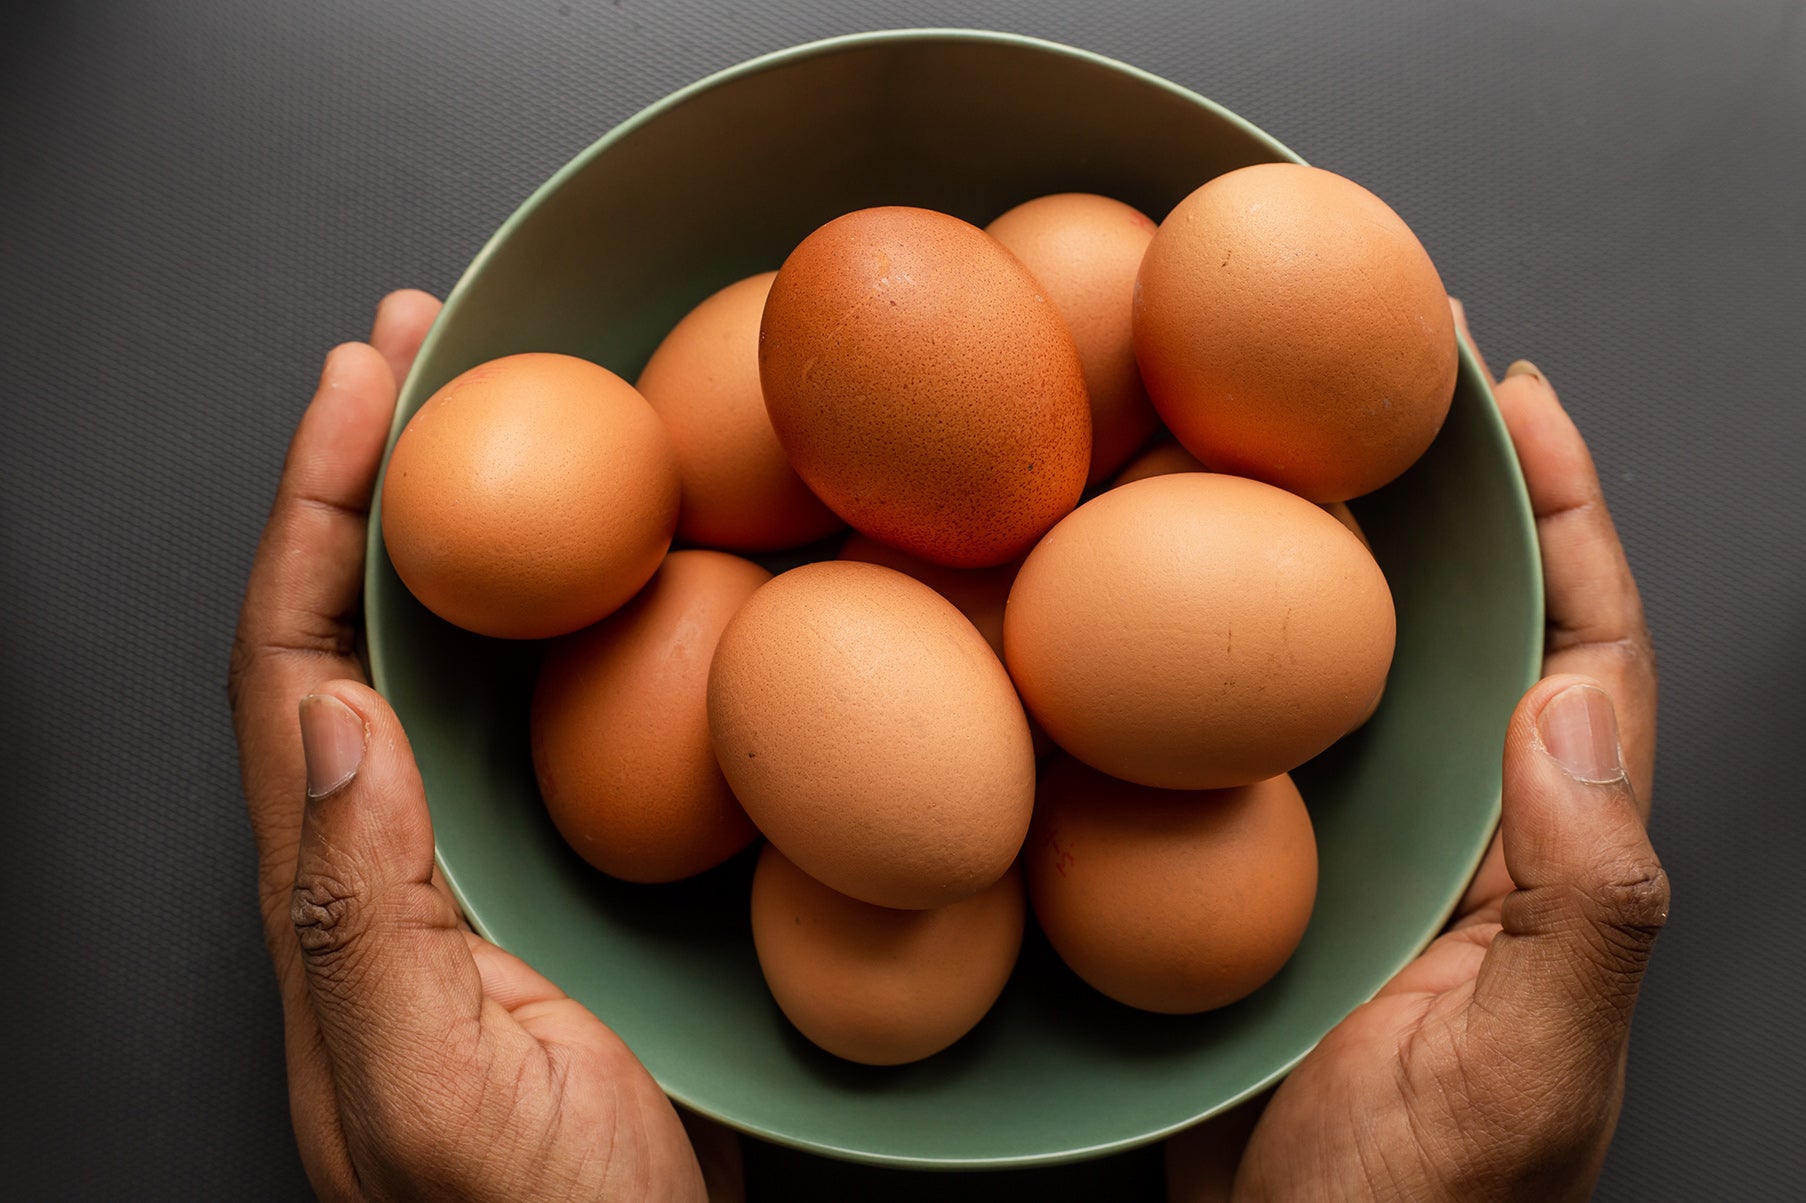 Hands holding a group of eggs in a green bowl.